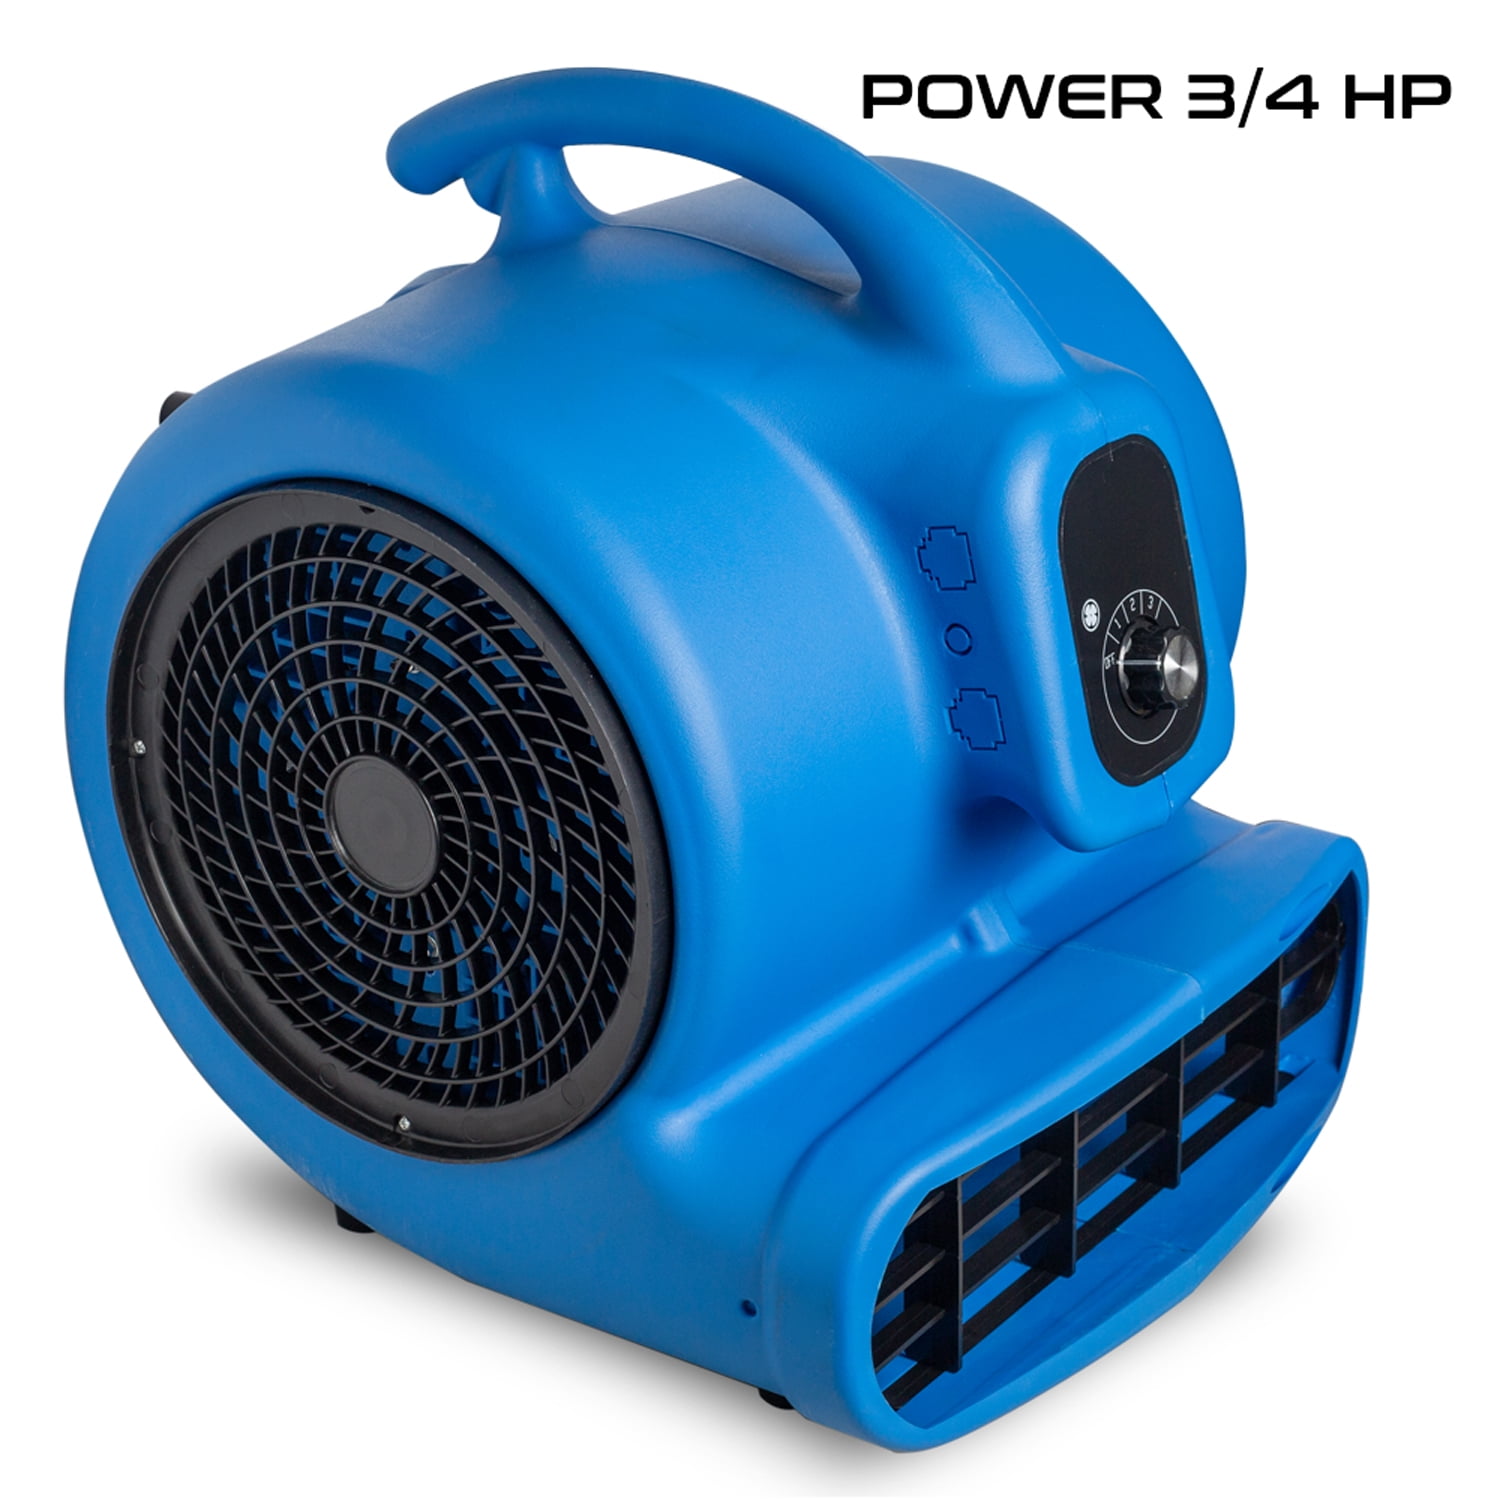 3/4HP Air Mover Blower Powerful Carpet Dryer Floor Drying Fan 3-Speed High Flo